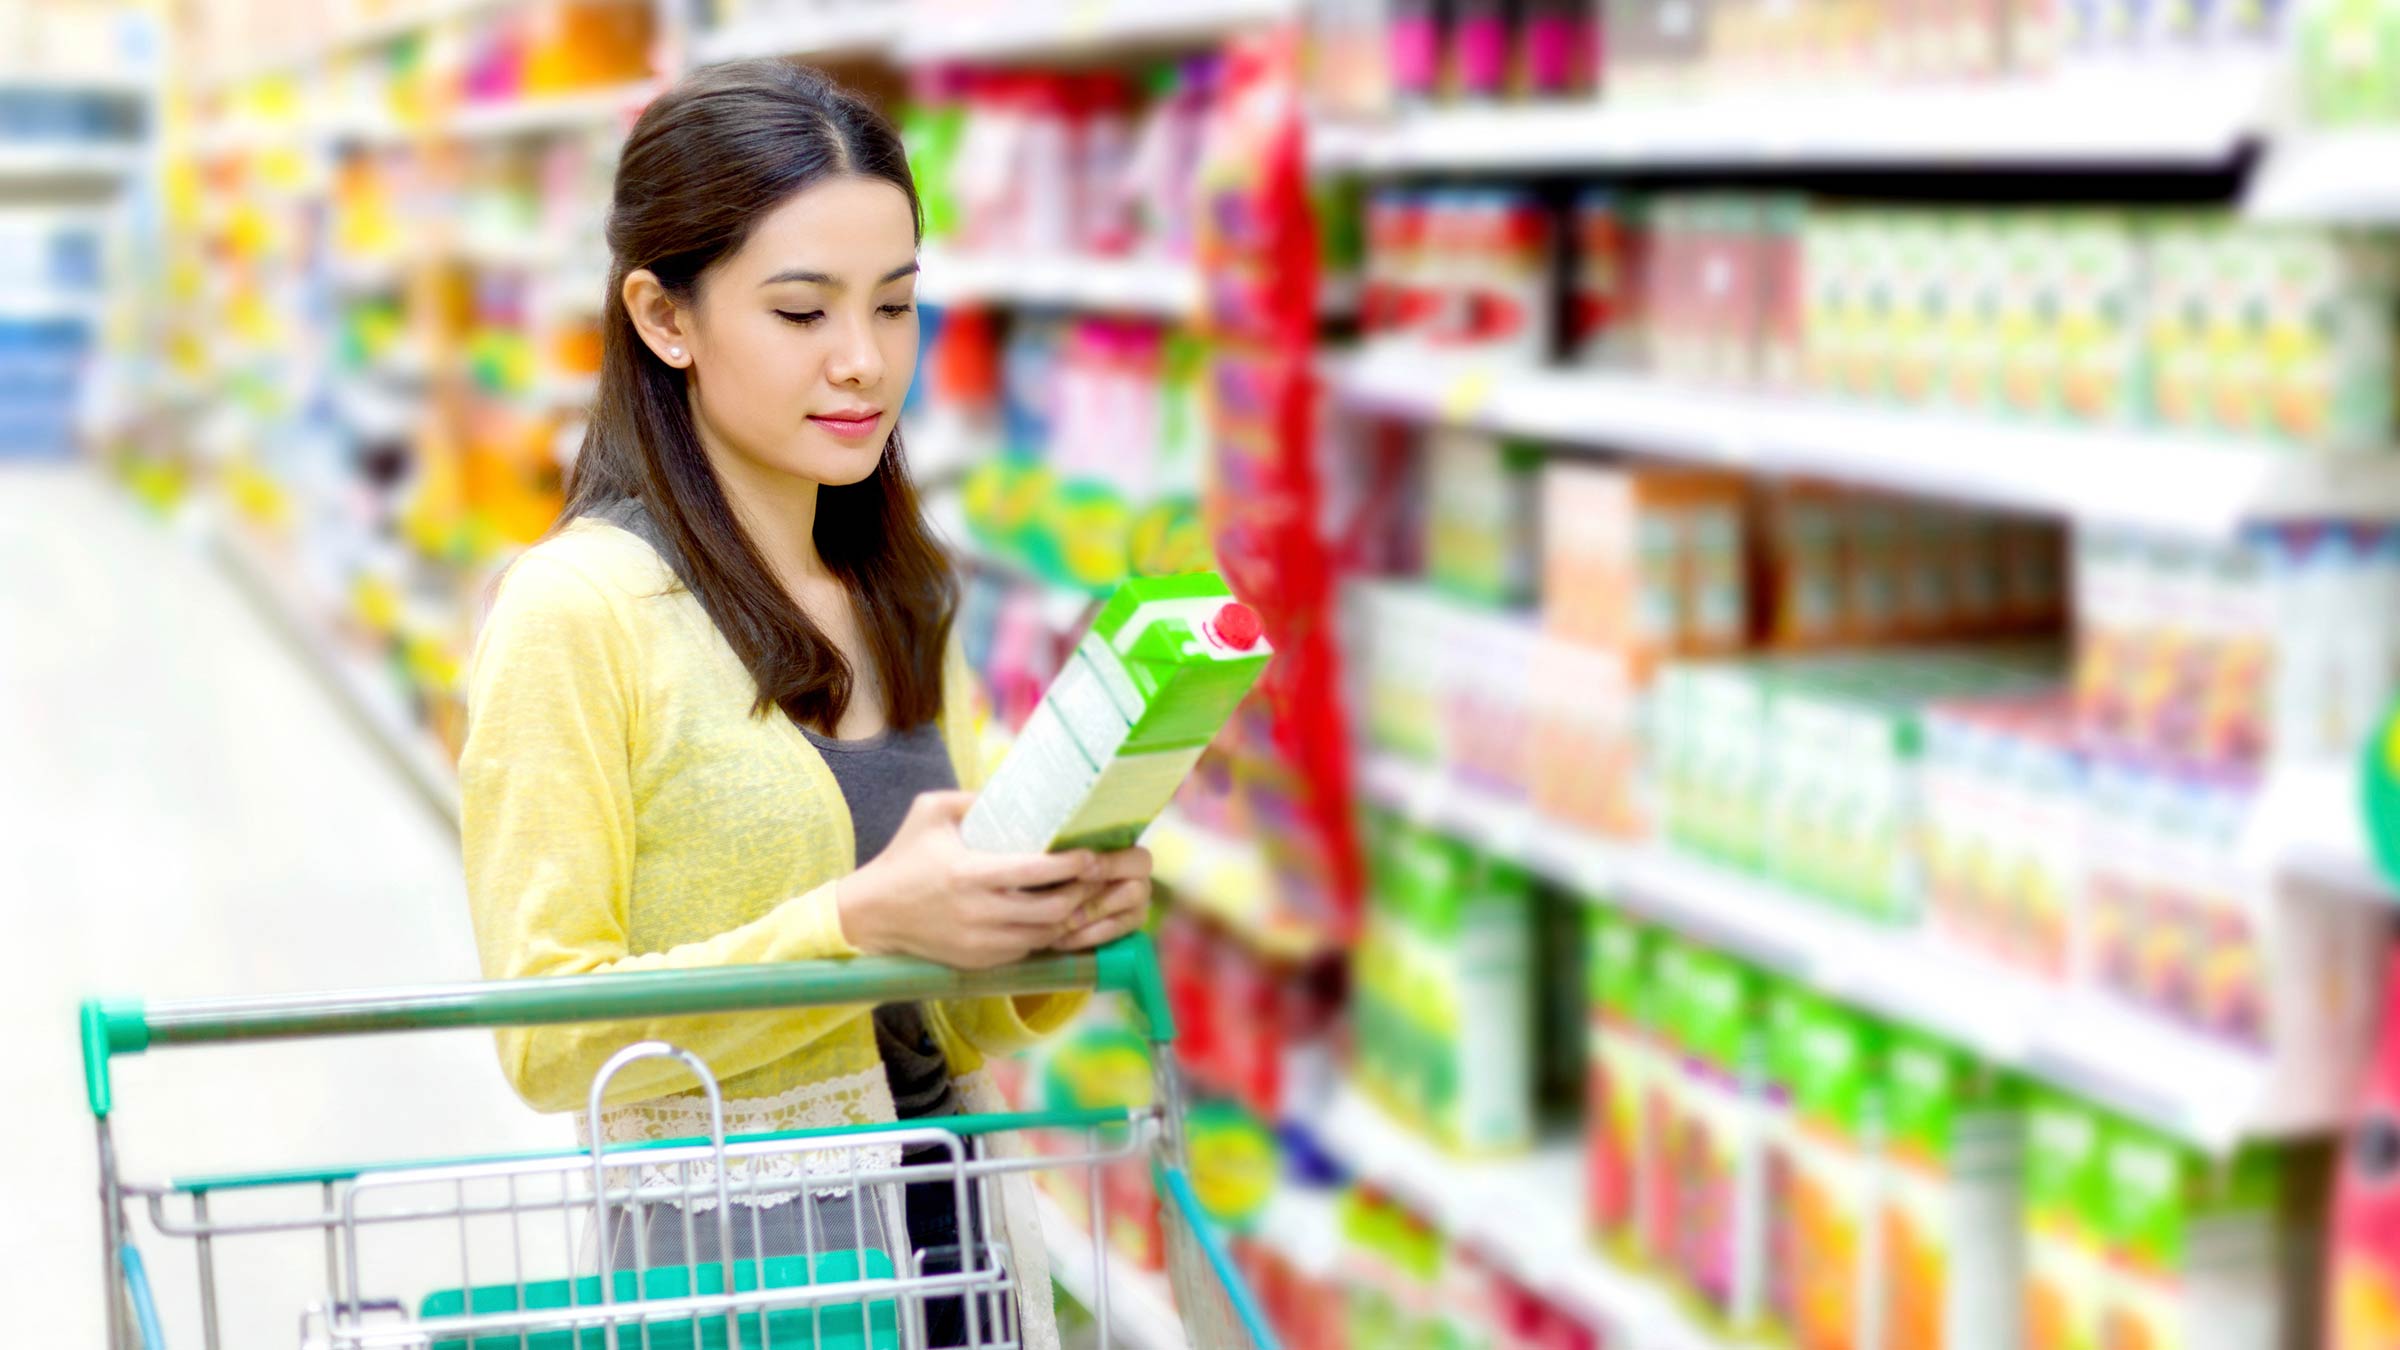 A woman reading the food label on boxed processed food at the grocery store